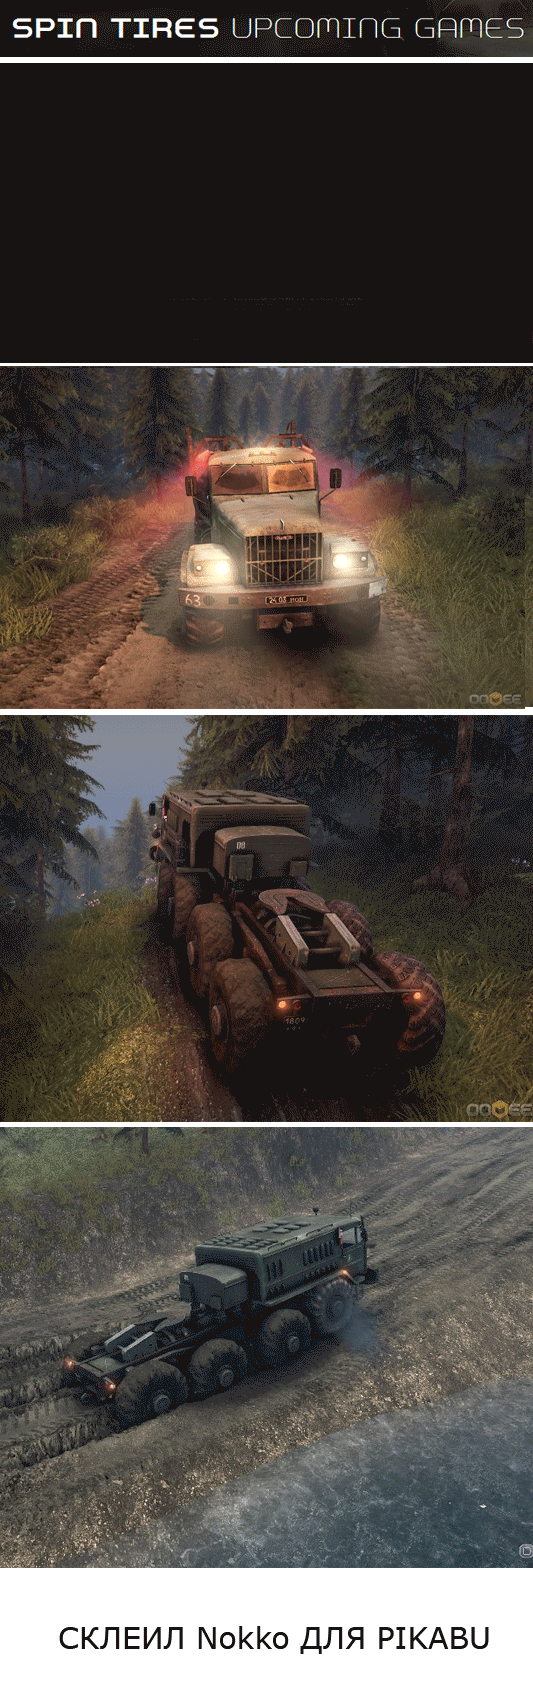 SpinTires      : http://www.facebook.com/Spintires